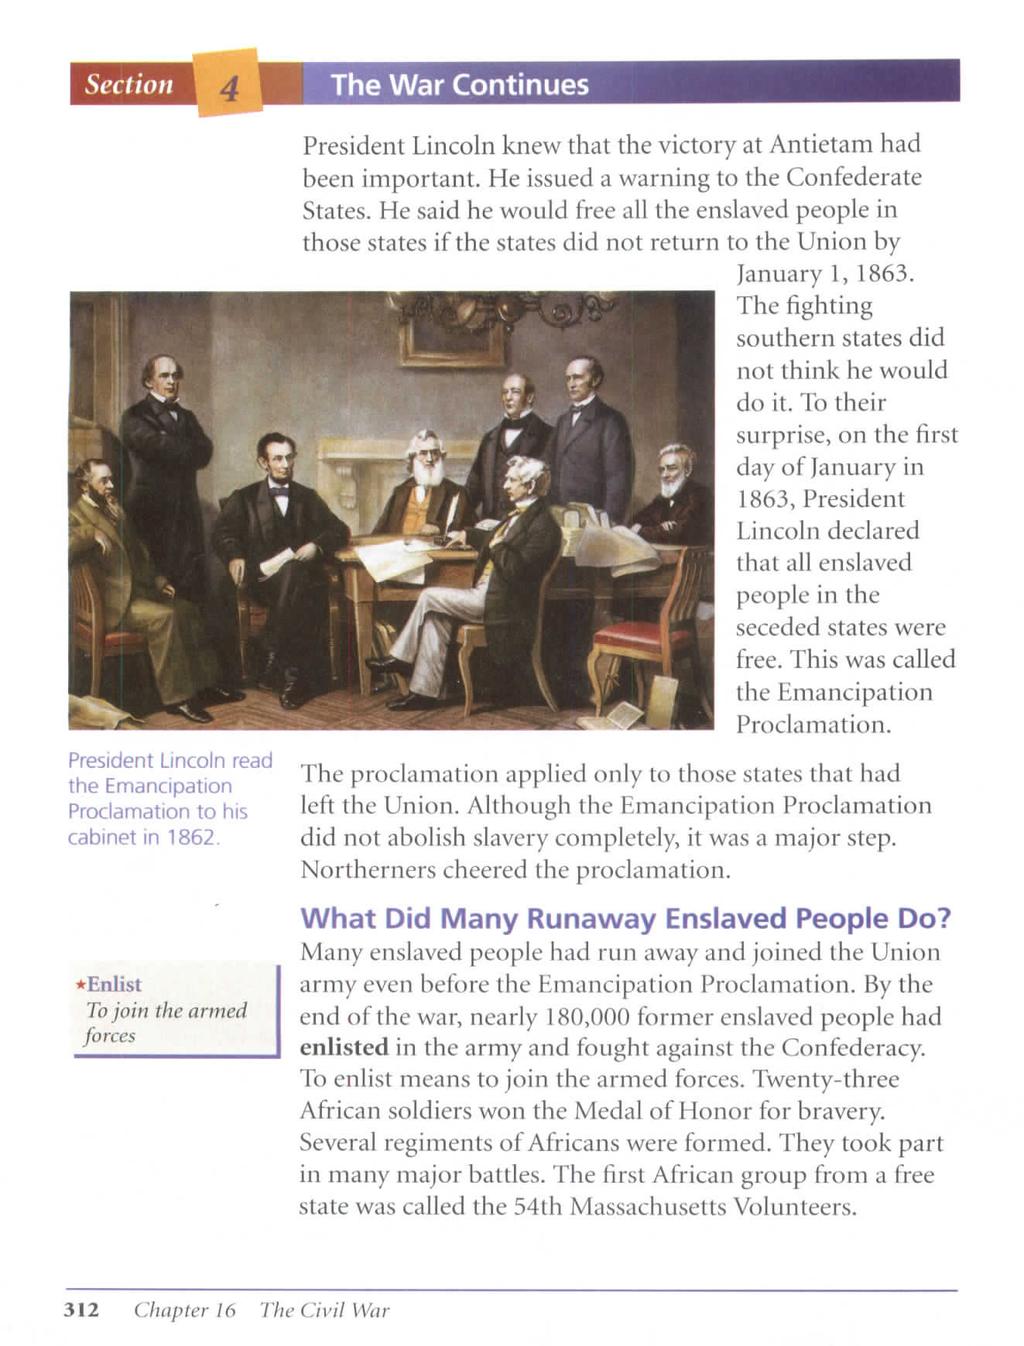 Section President Lincoln read the Emancipation Proclamation to his cabinet in 1862.